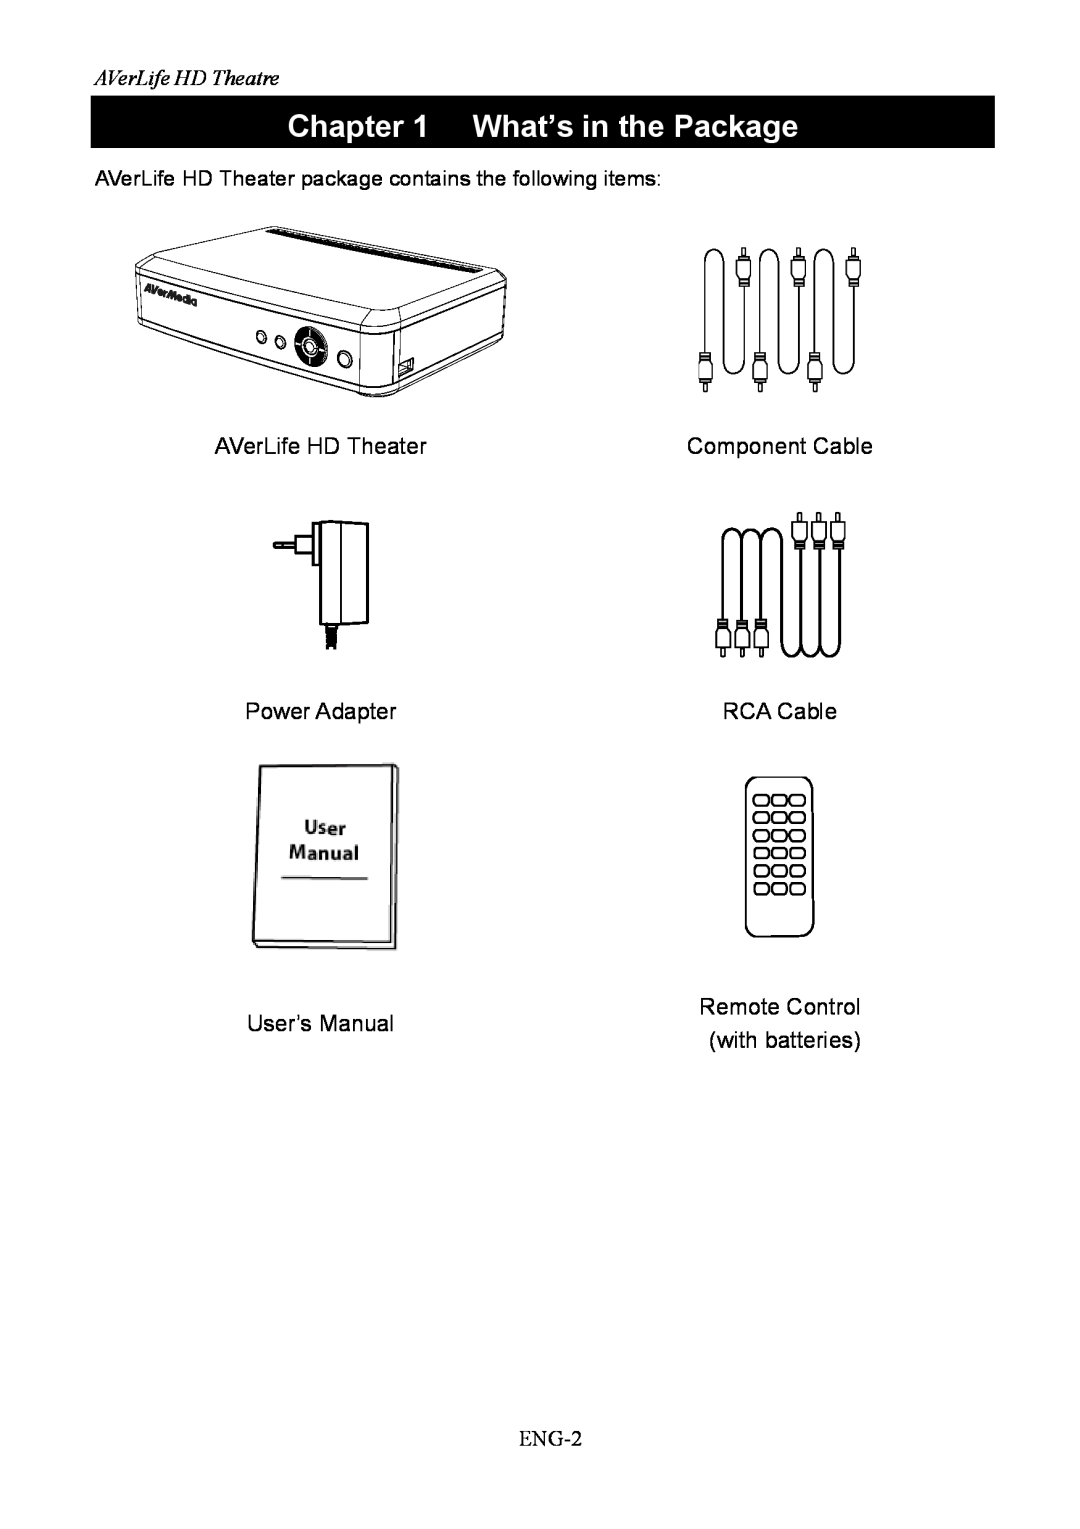 AVerMedia Technologies A211 user manual What’s in the Package, AVerLife HD Theatre, Component Cable, RCA Cable, ENG-2 